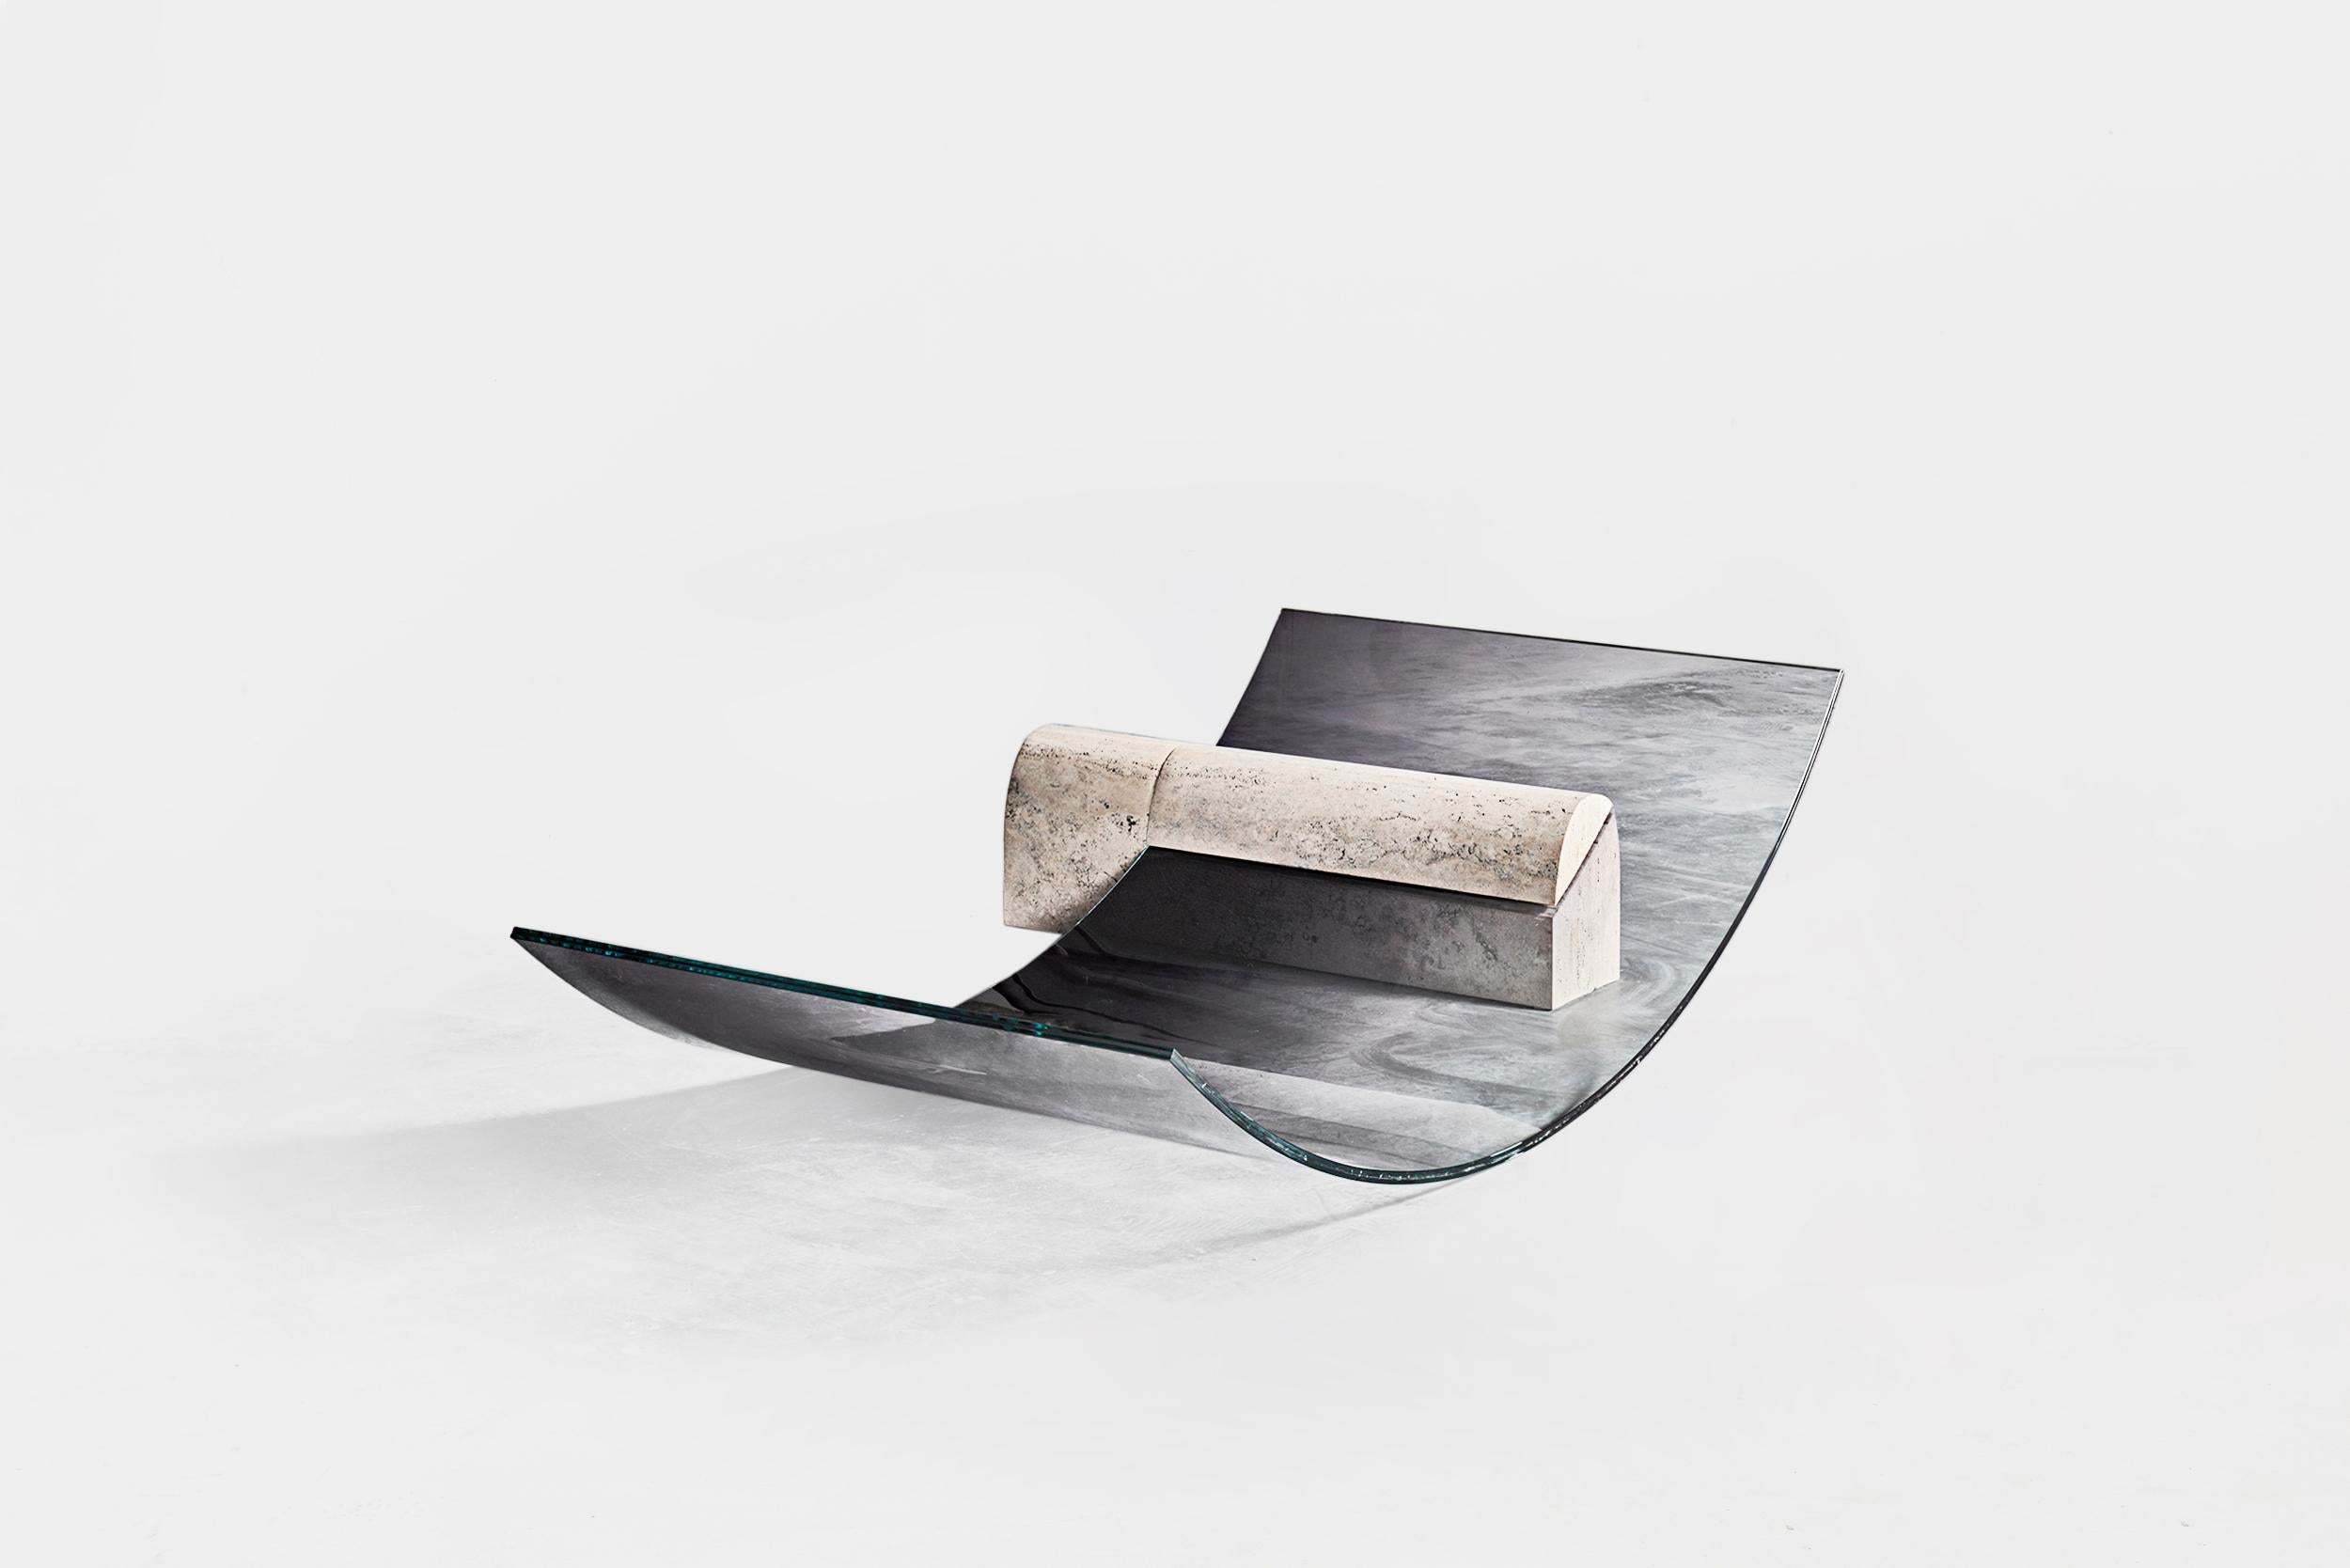 Dutch Sabine Marcelis Single Chaise Lounge From the series “No Fear of Glass”, 2019  For Sale